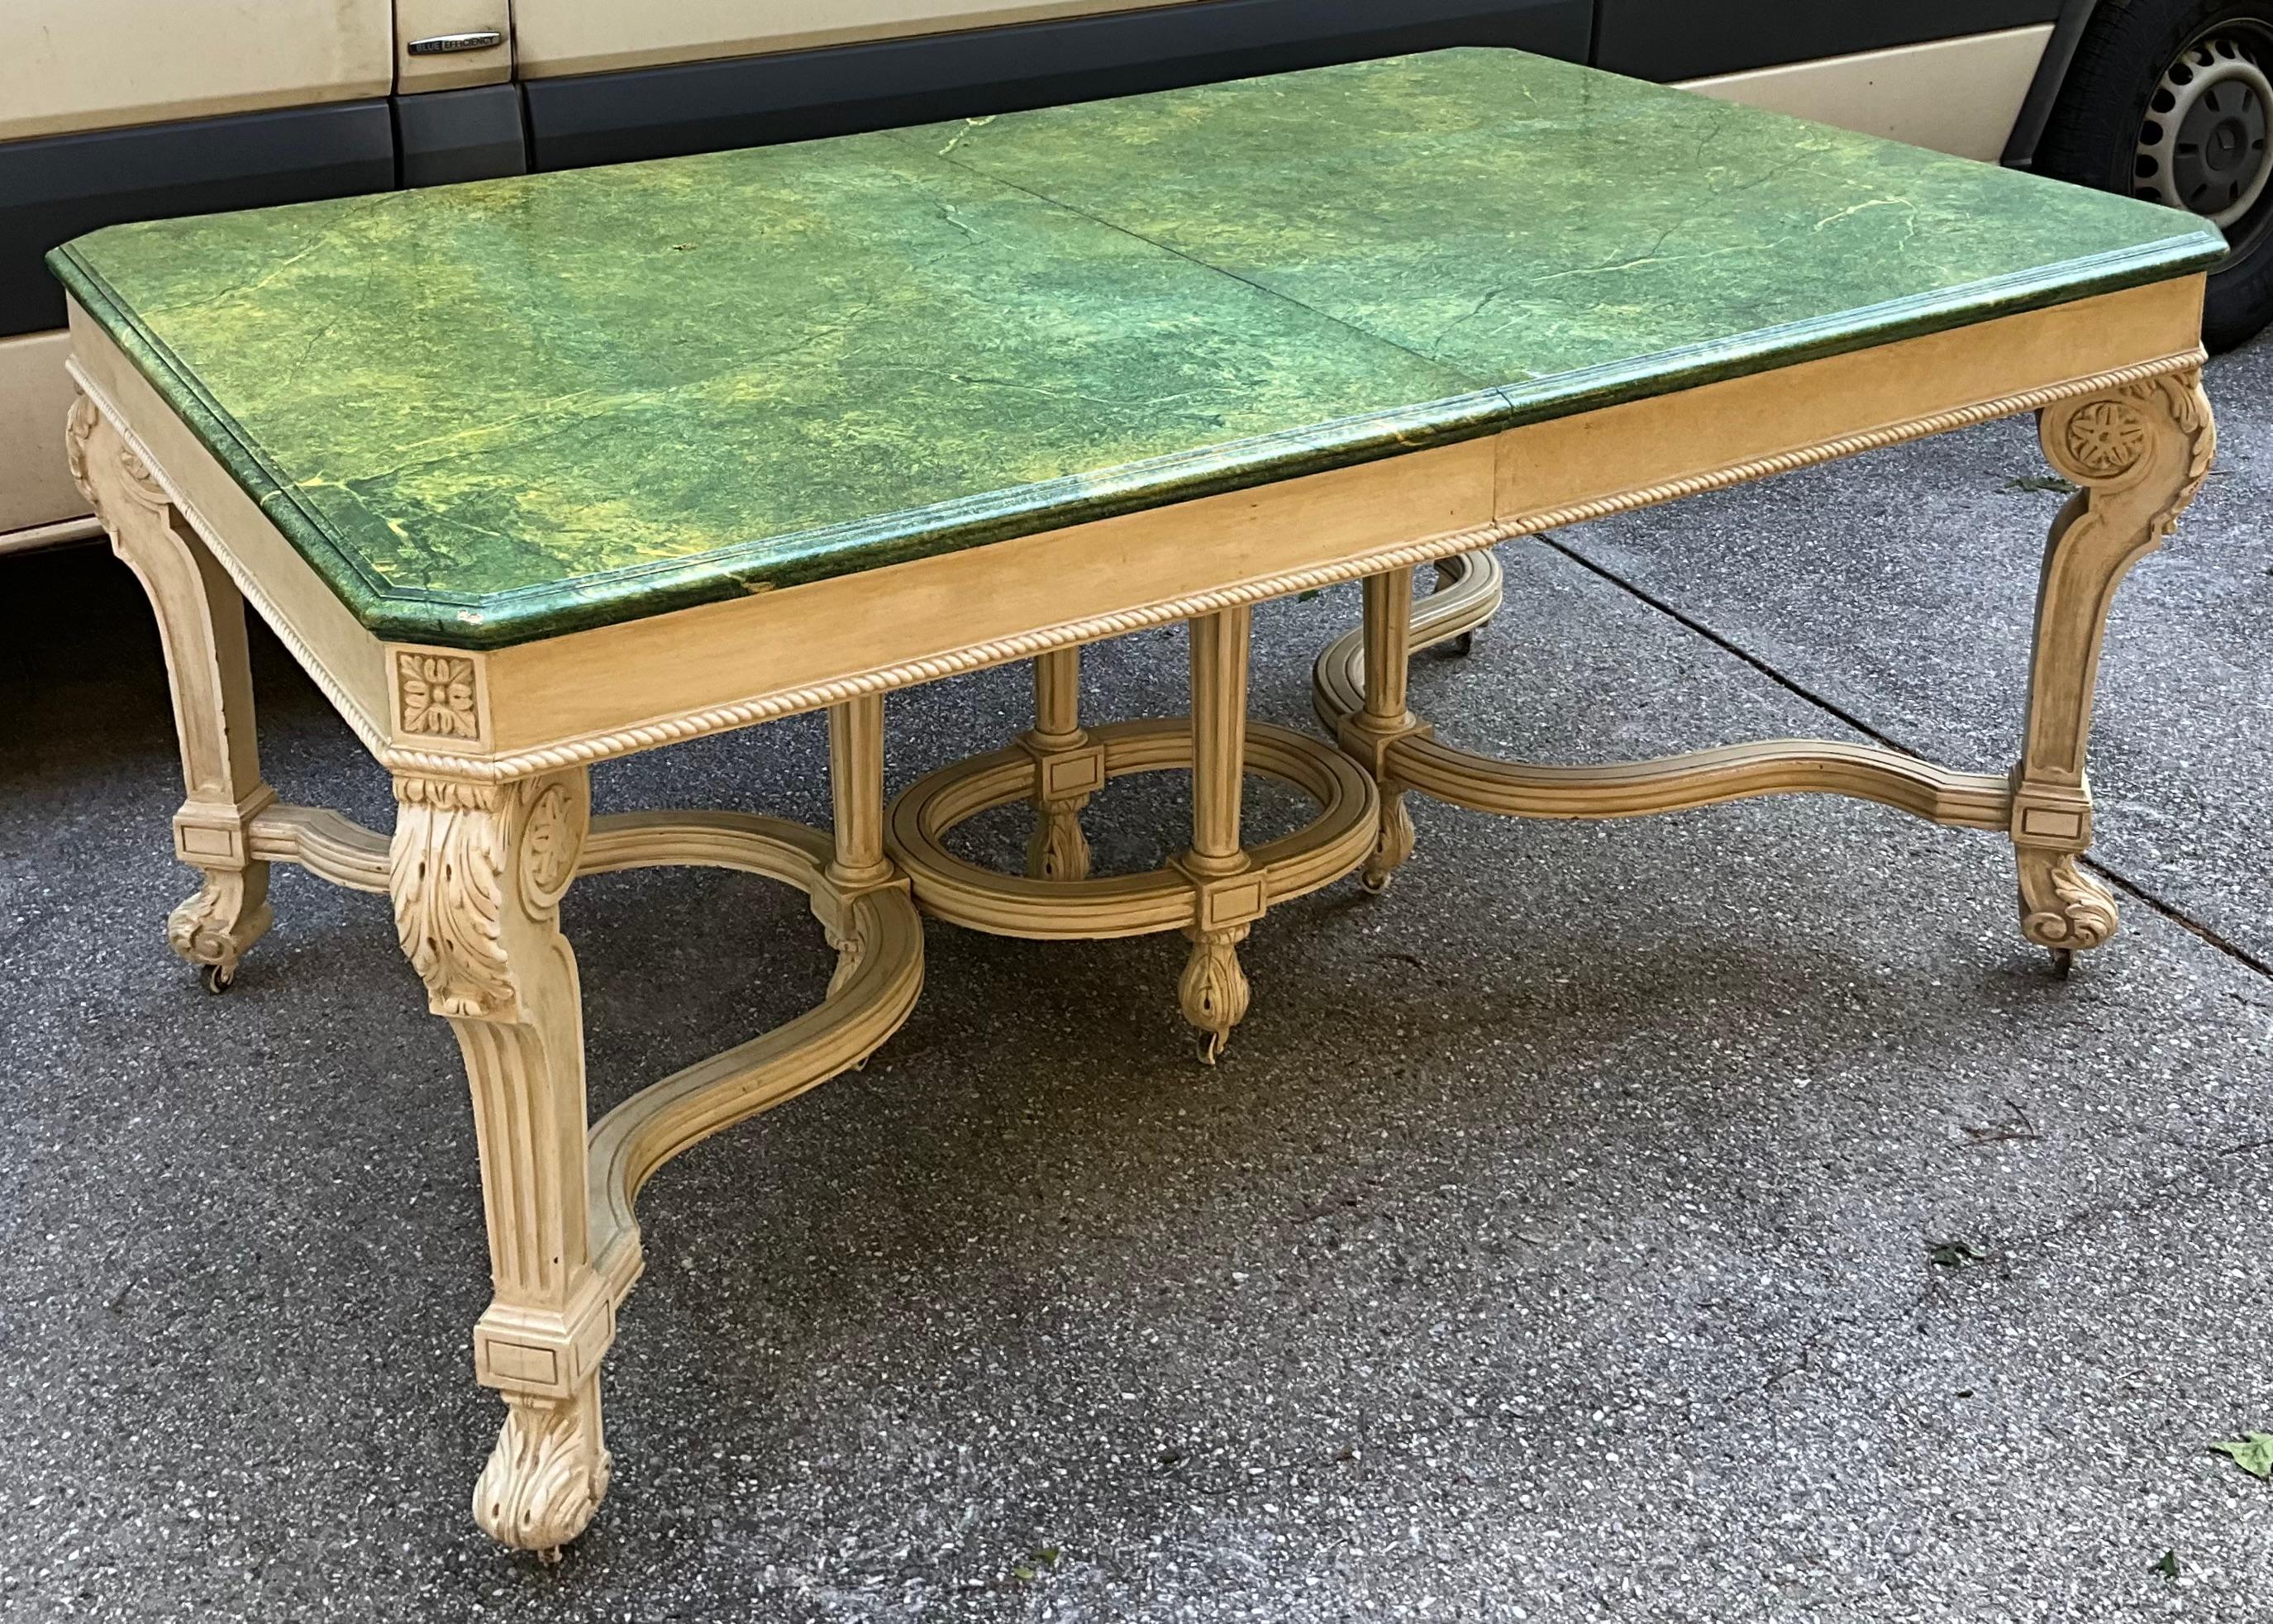 This is a 1970s Regency style faux marble painted dining table. The faux marbleized finish is original as is the ivory base. The table has five leaves, and each leaf adds eleven inches. It is in very good condition. 


